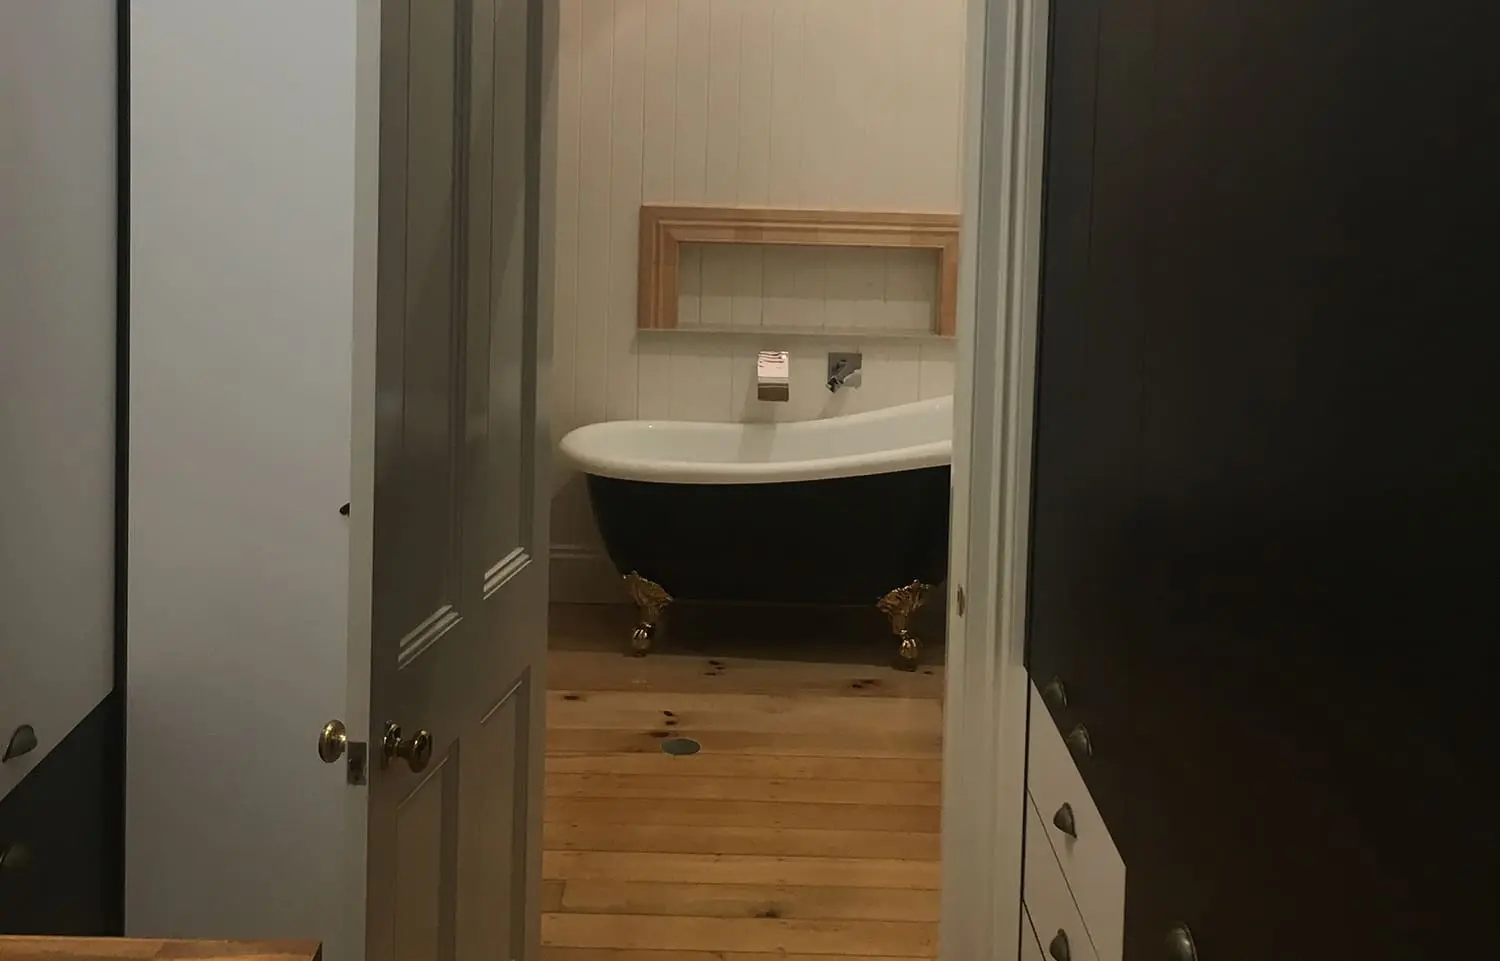 A narrow doorway opens into a bathroom featuring a vintage-style black clawfoot bathtub with gold feet. The tub is set against a white-paneled wall with a wooden shelf above it. The bathroom has natural wooden flooring and dark cabinetry on the right side. Builders Bayside Brisbane, Home Renovations Redlands